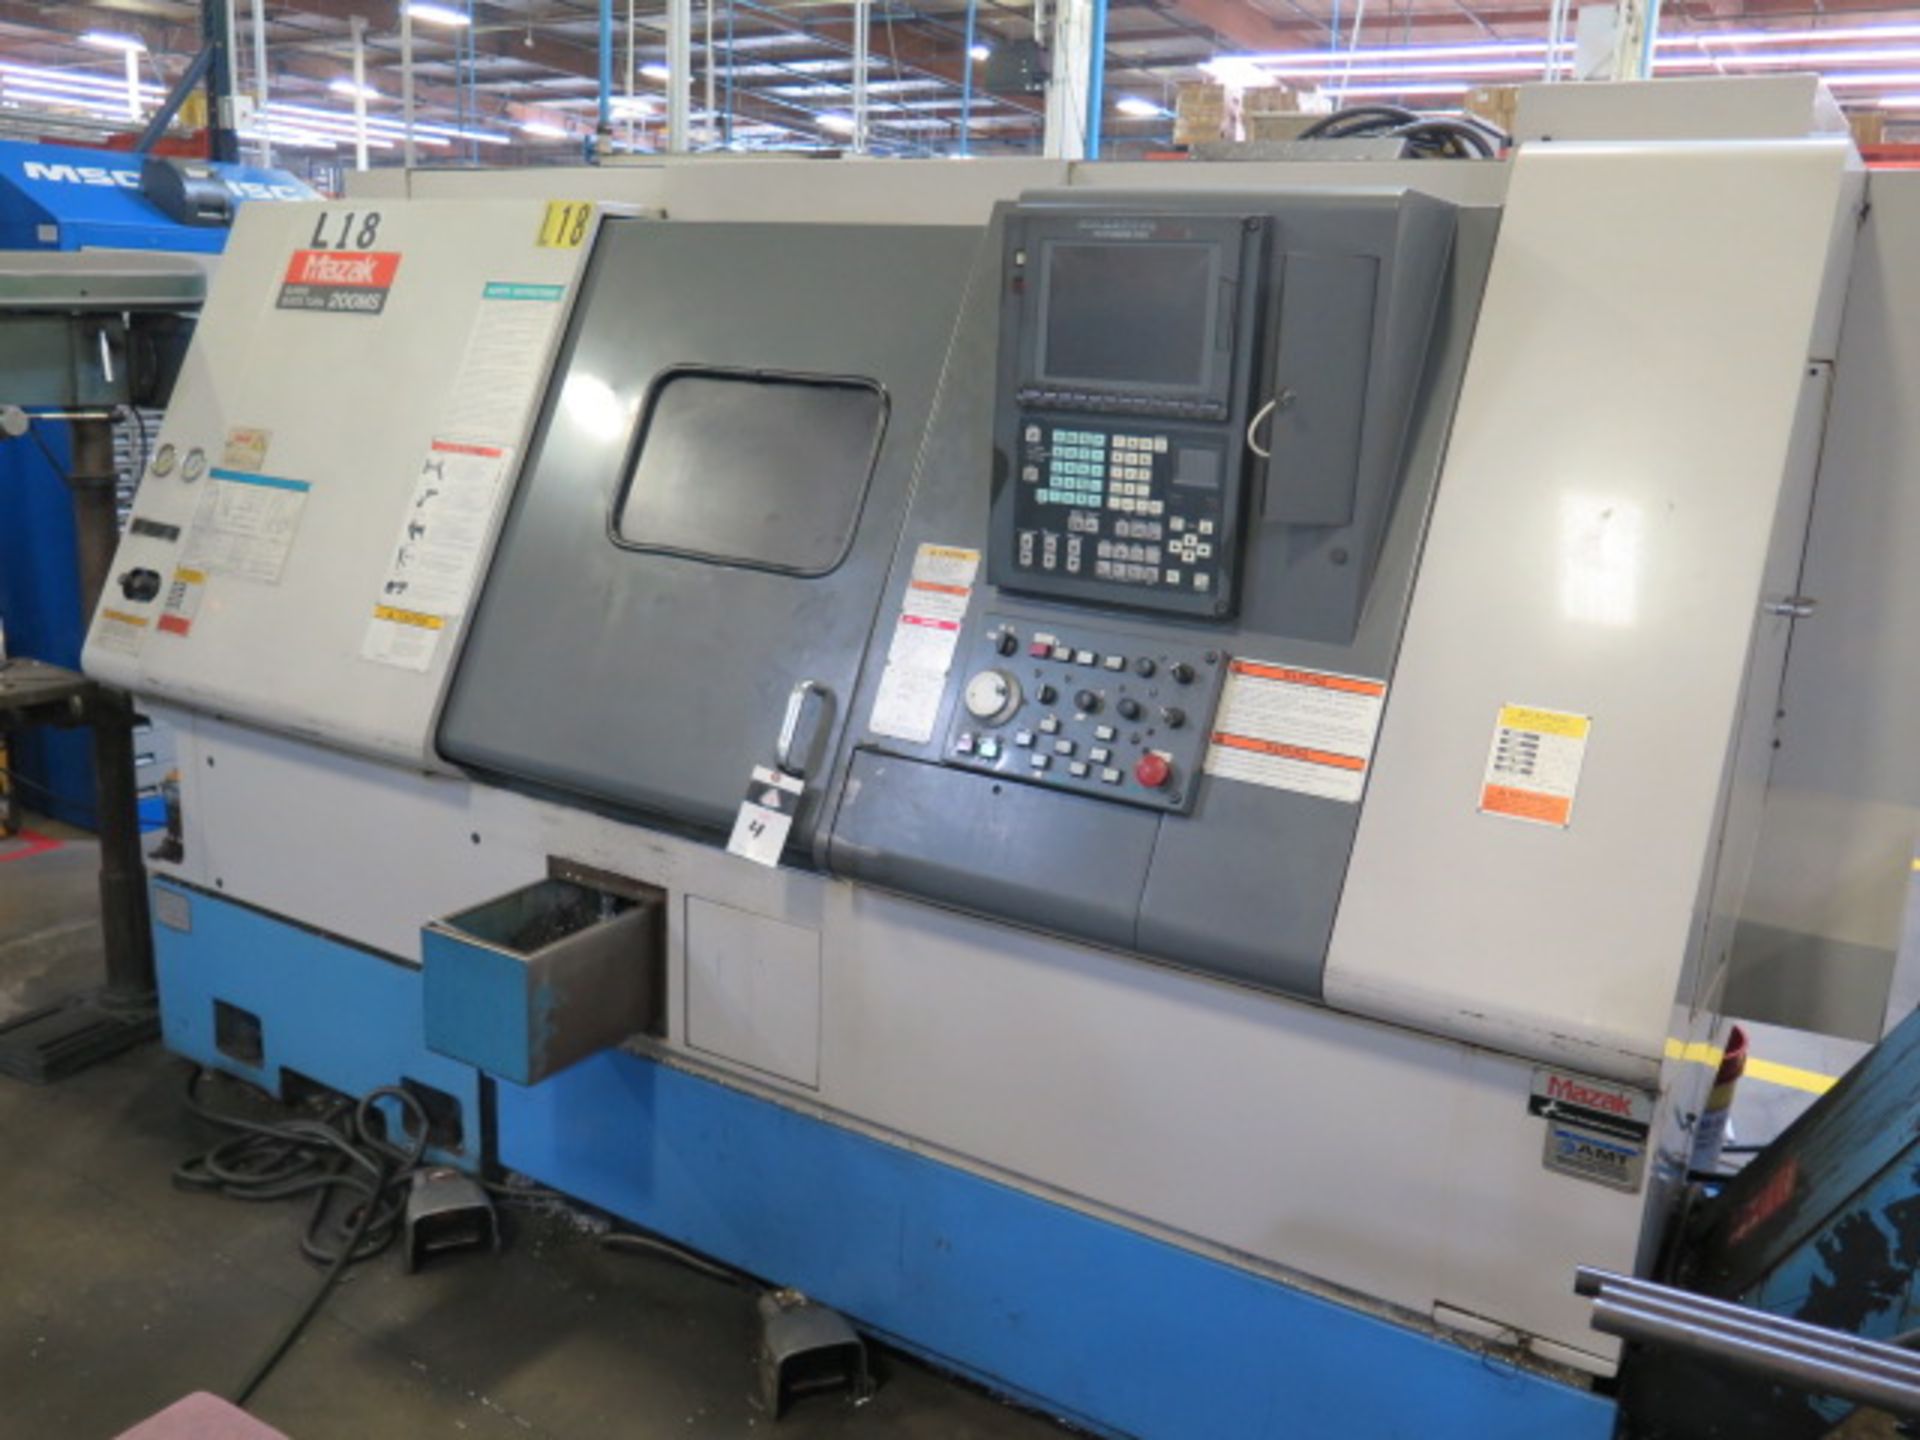 2002 Mazak Super QT 200MS Twin Spindle Live Turret CNC Lathe (TOOLING NOT INCLUDED), SOLD AS IS